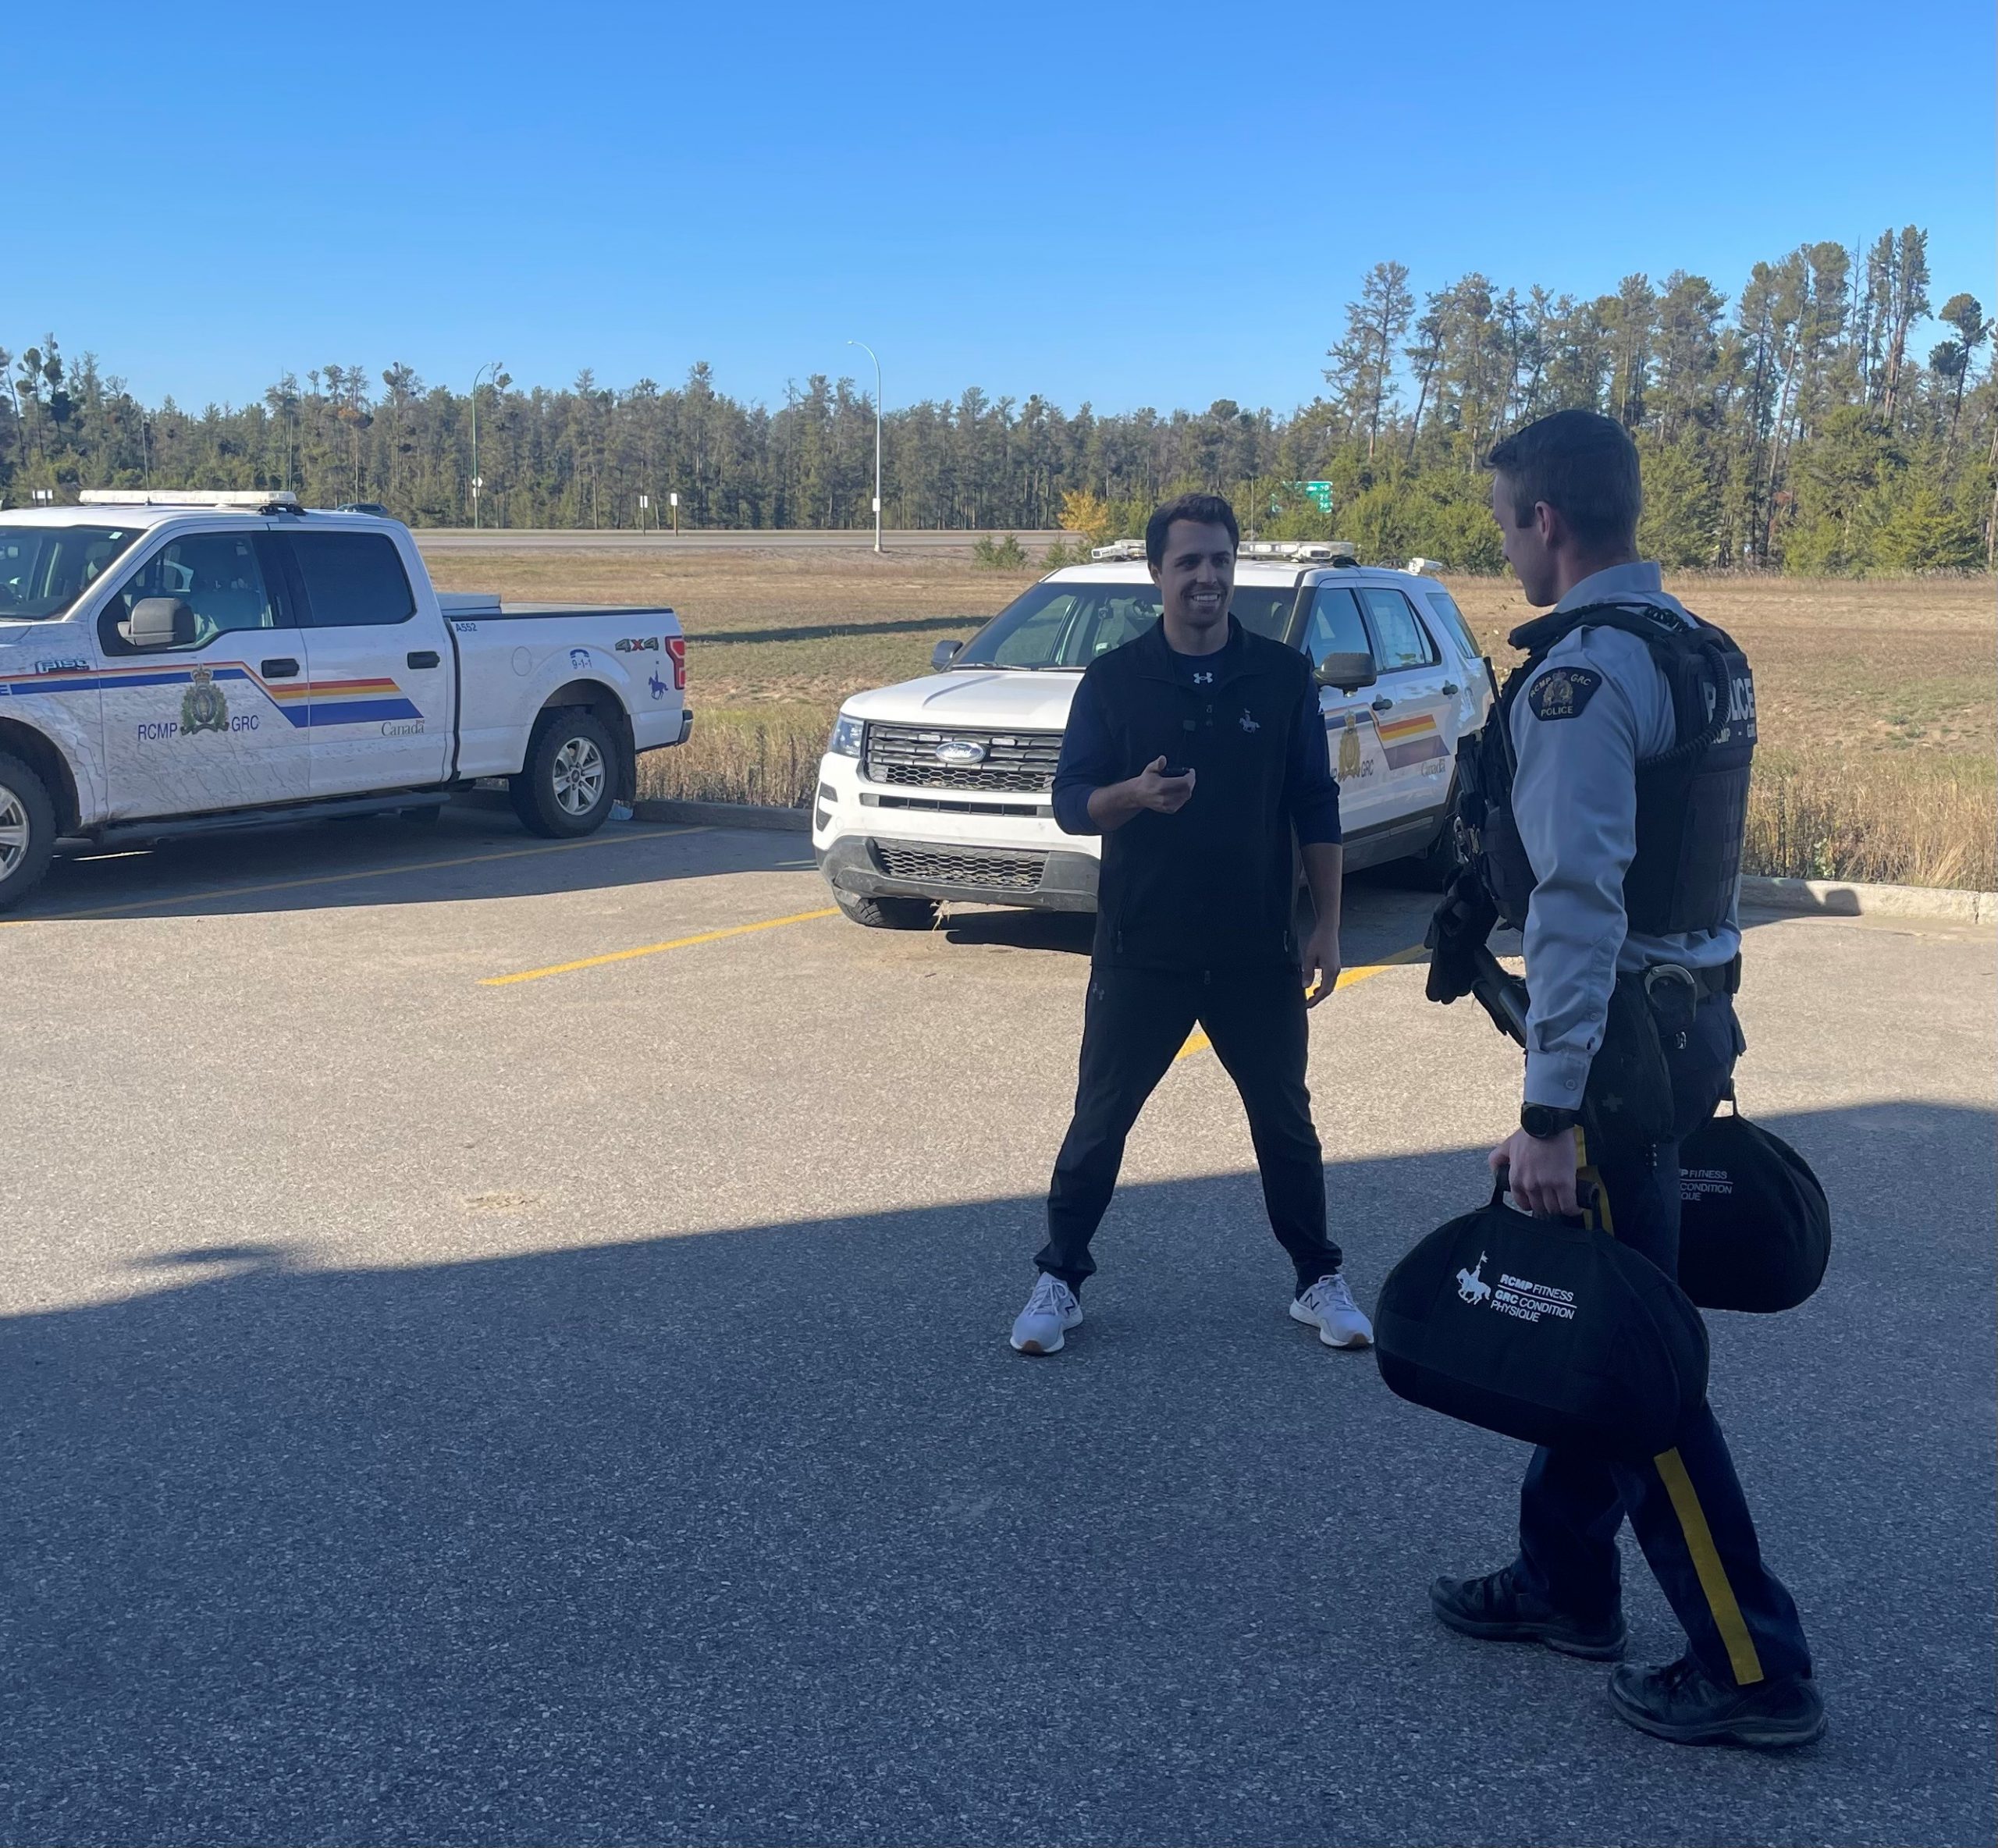 With 32 detachments in the north, and 16 satellite community detachments, Arndt's territory is massive. He's pictured here in Prince Albert where he is based.